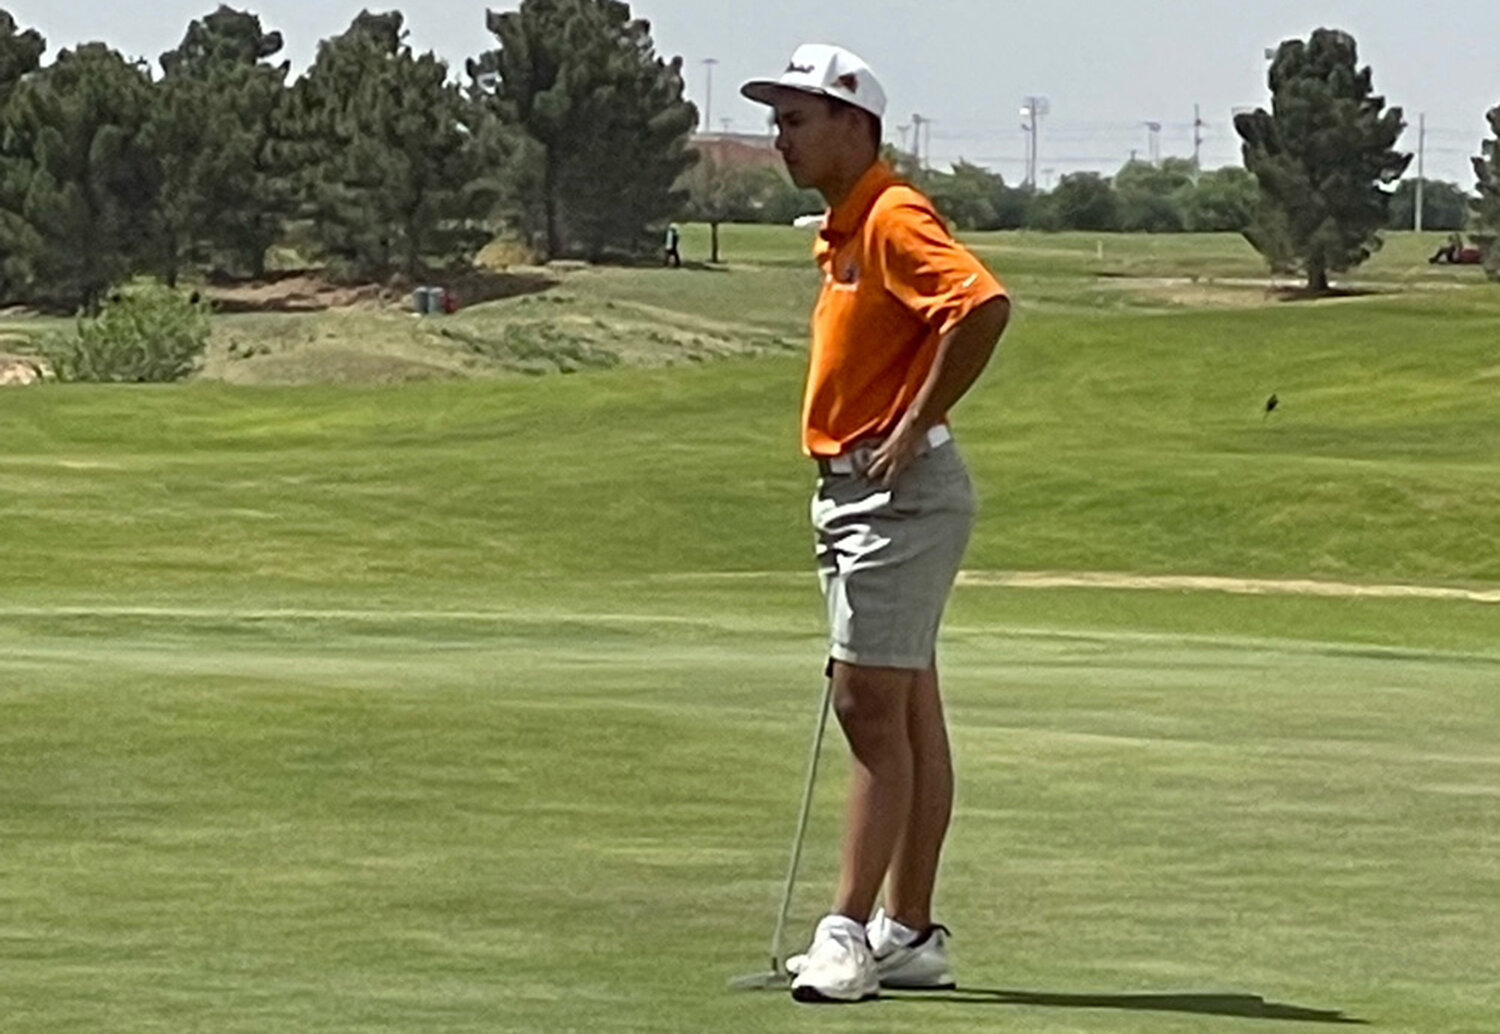 Aledo senior Braylon Mahanay will compete at the Class 5A Boys State Golf Tournament May 22-23 after qualifying from the 5A Region 1 Tournament in Lubbock.